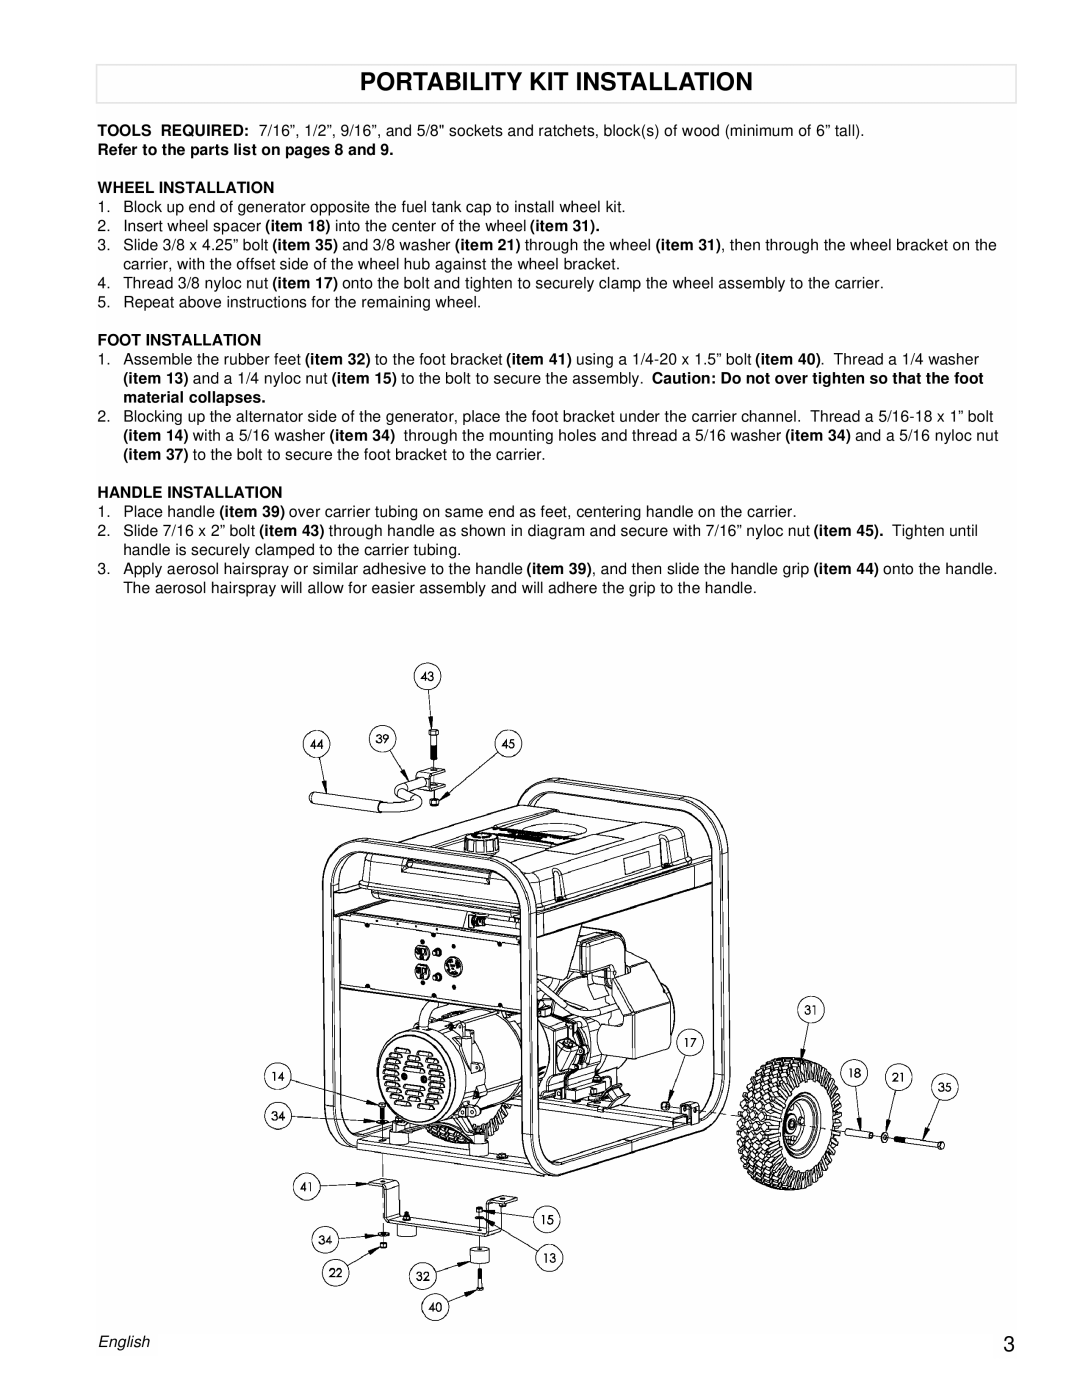 Powermate PM0525303.03 Portability Kit Installation, Refer to the parts list on pages 8 and, Wheel Installation, English 